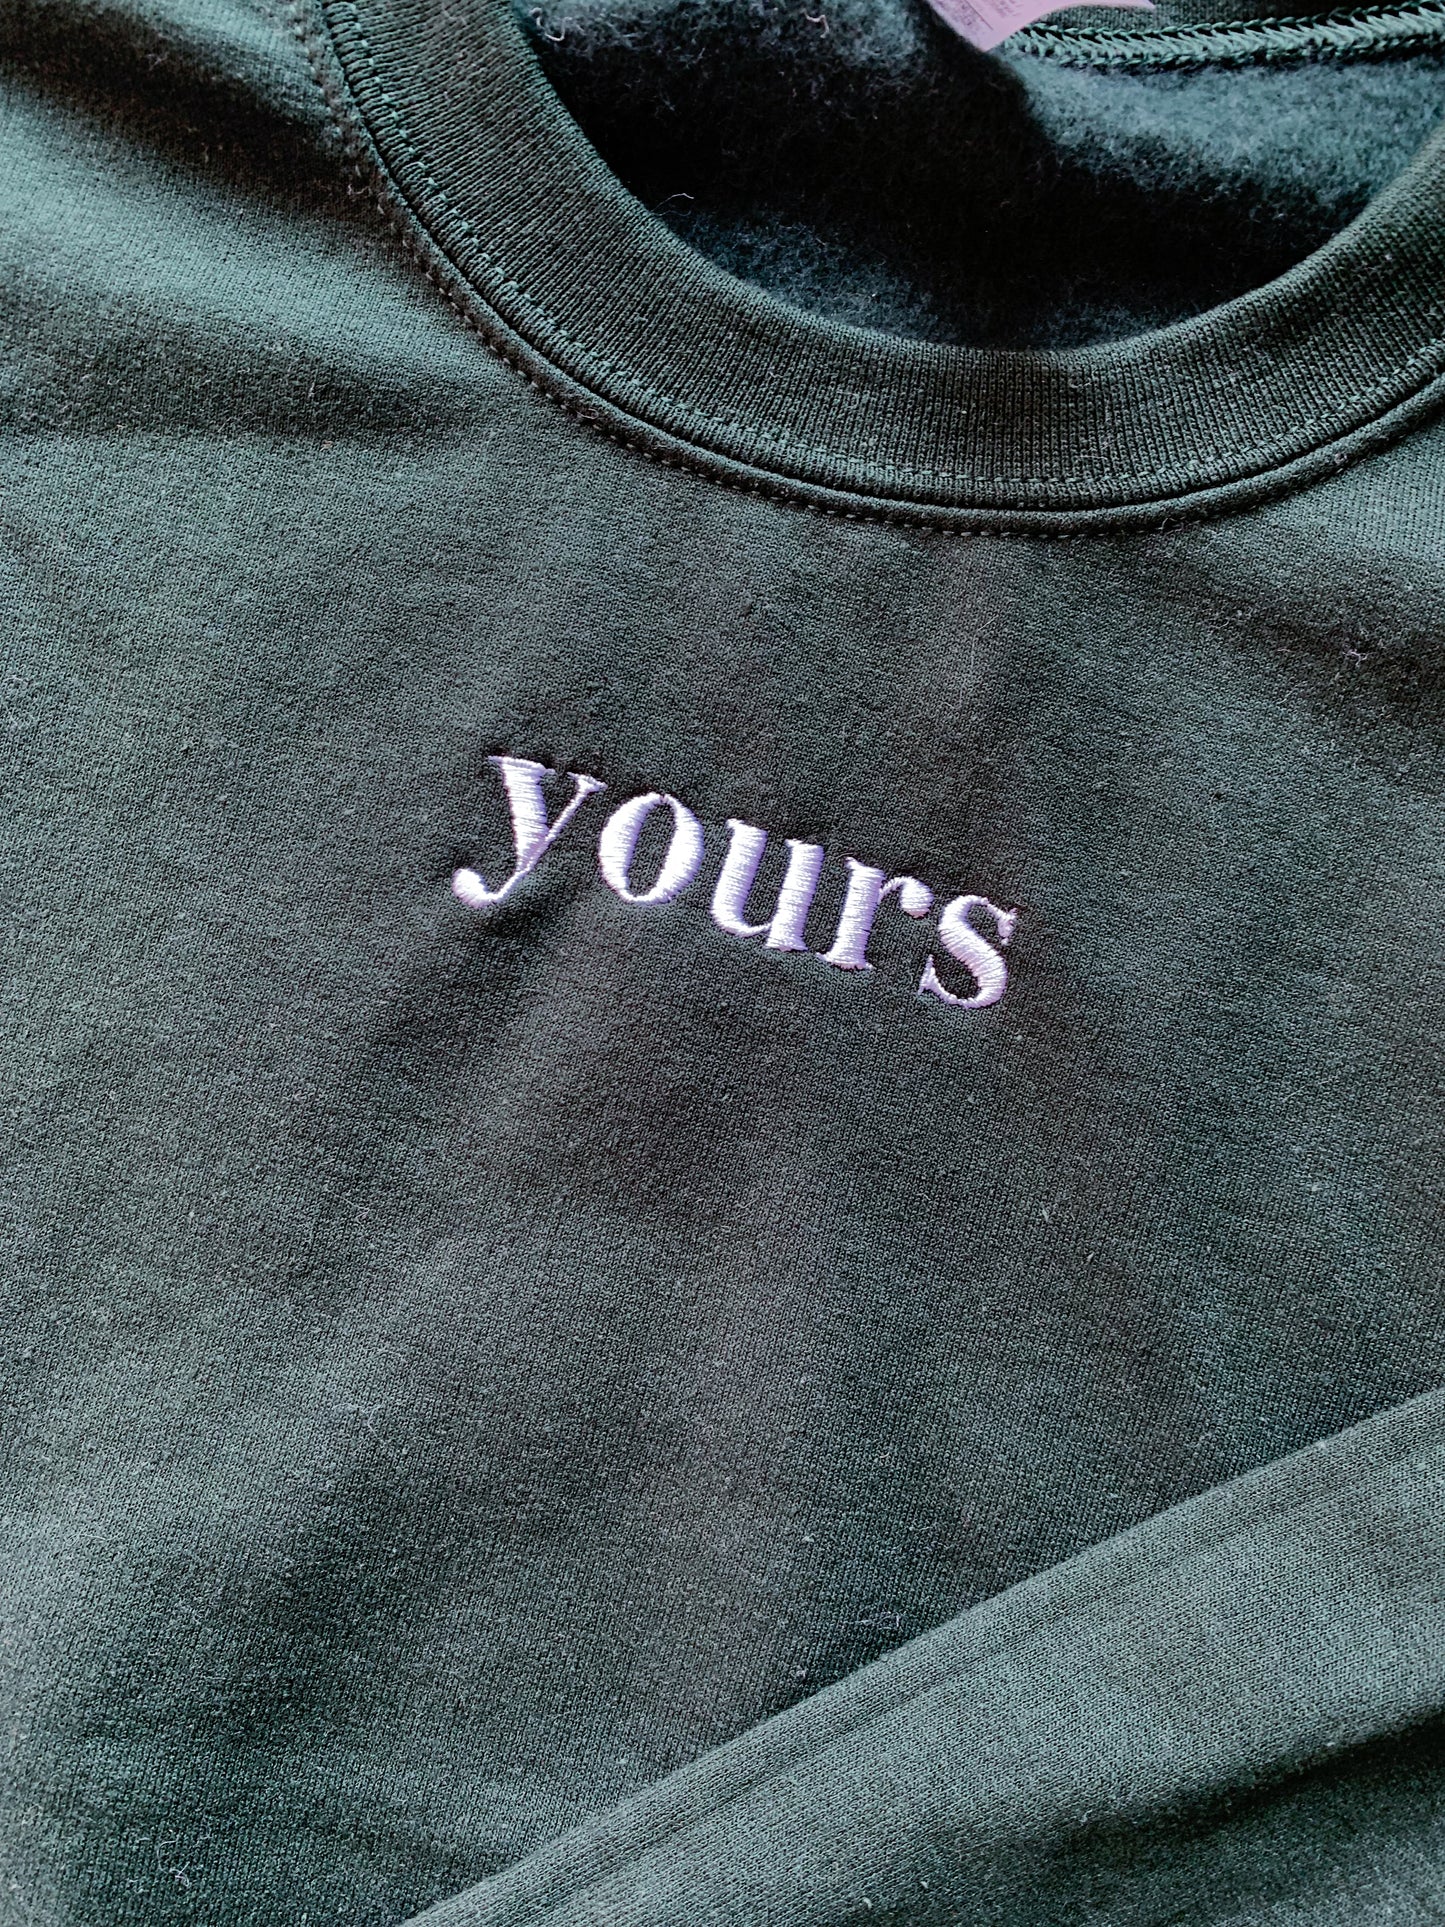 "mine" "yours" Embroidered Matching Set